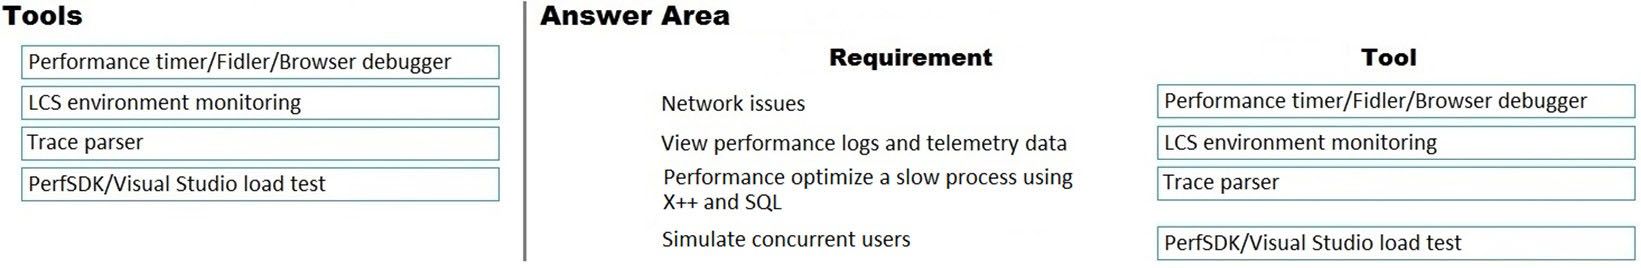 Tools

Performance timer/Fidler/Browser debugger

LCS environment monitoring

Trace parser

PerfSDK/Visual Studio load test

Answer Area

Requirement
Network issues

View performance logs and telemetry data

Performance optimize a slow process using
X++ and SQL

Simulate concurrent users

Tool

Performance timer/Fidler/Browser debugger

LCS environment monitoring

Trace parser

PerfSDK/Visual Studio load test